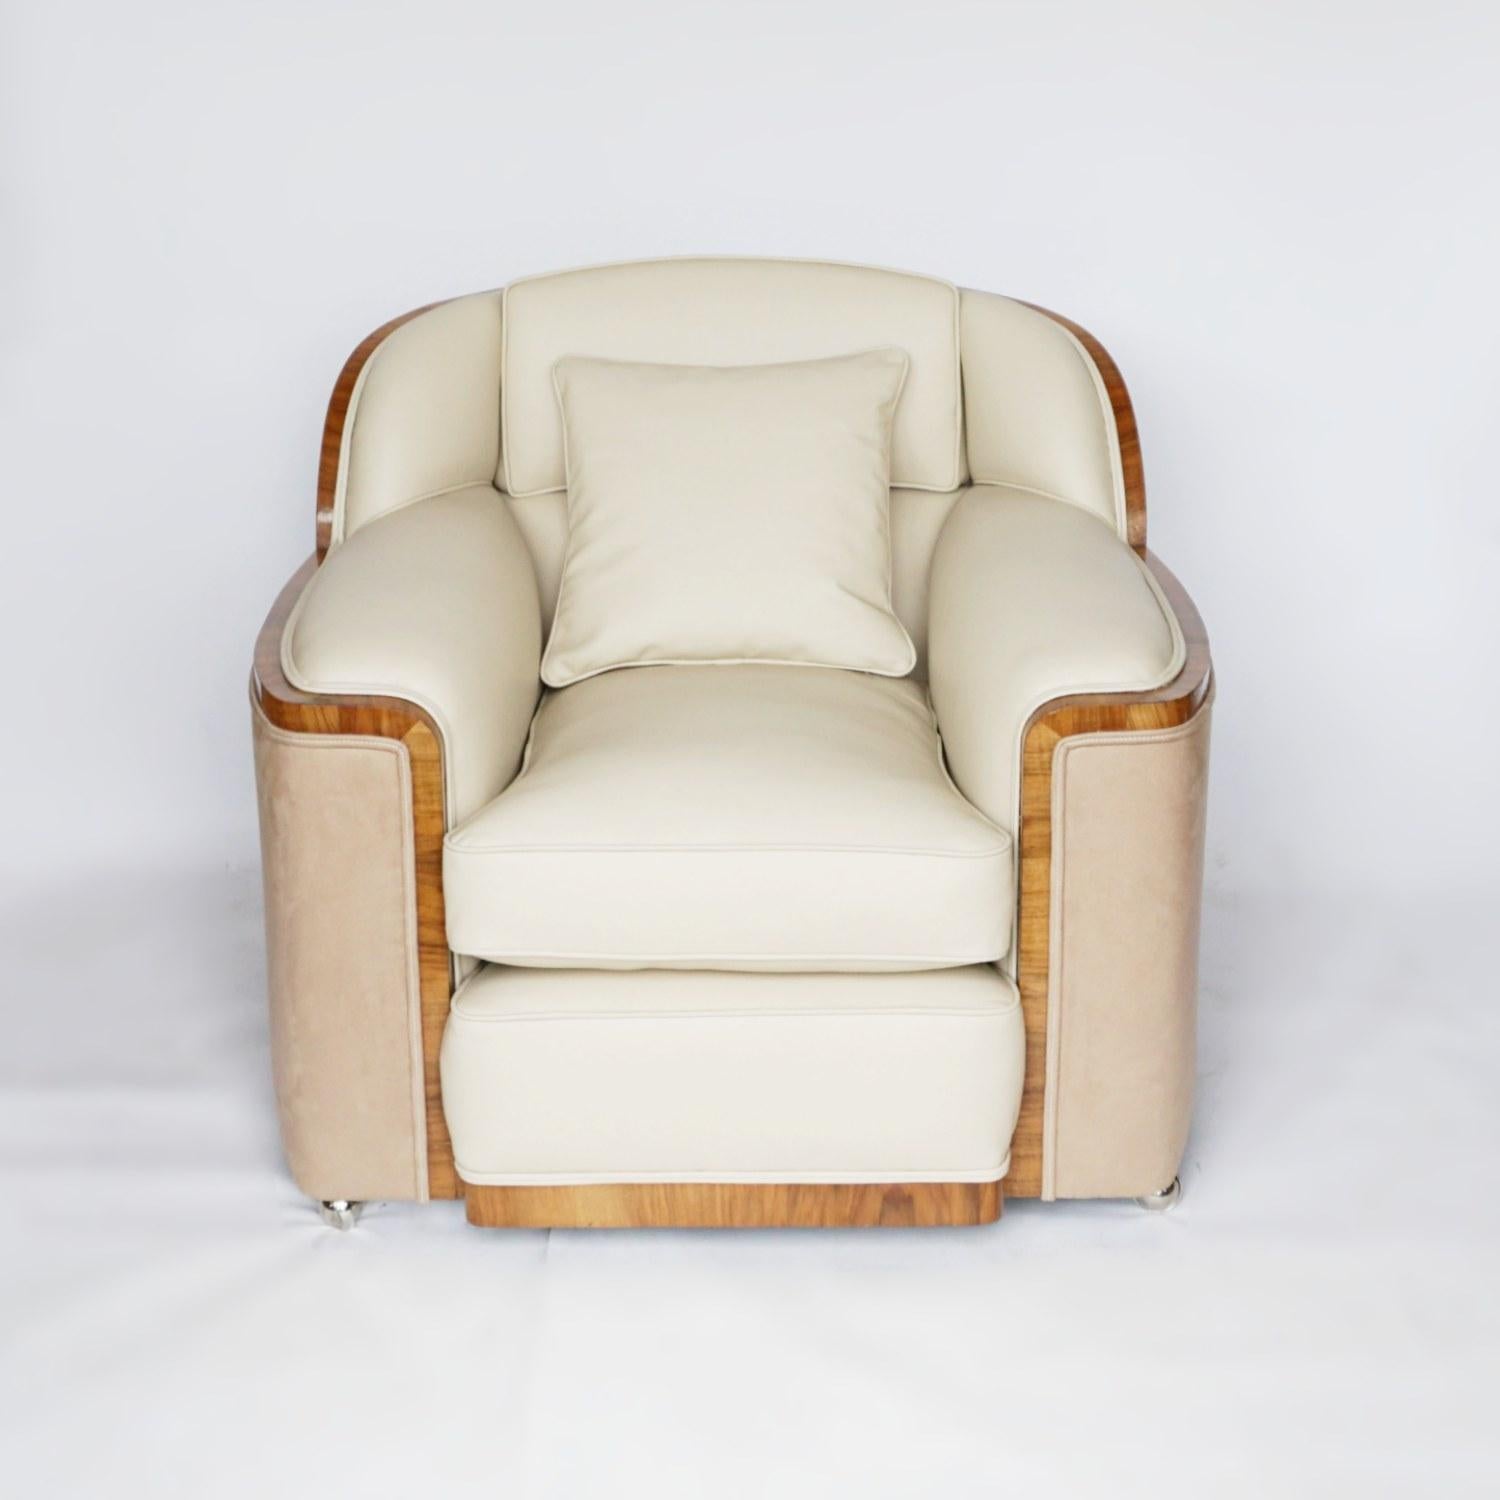 An Art Deco three-piece bankers suite by Harry & Lou Epstein, comprising of a three-seat sofa and pair of lounge chairs. Figured walnut banding, re-upholstered in cream leather and Alcantara oatmeal suede.

Dimensions: Sofa, H 83 cm, W 185 cm, D